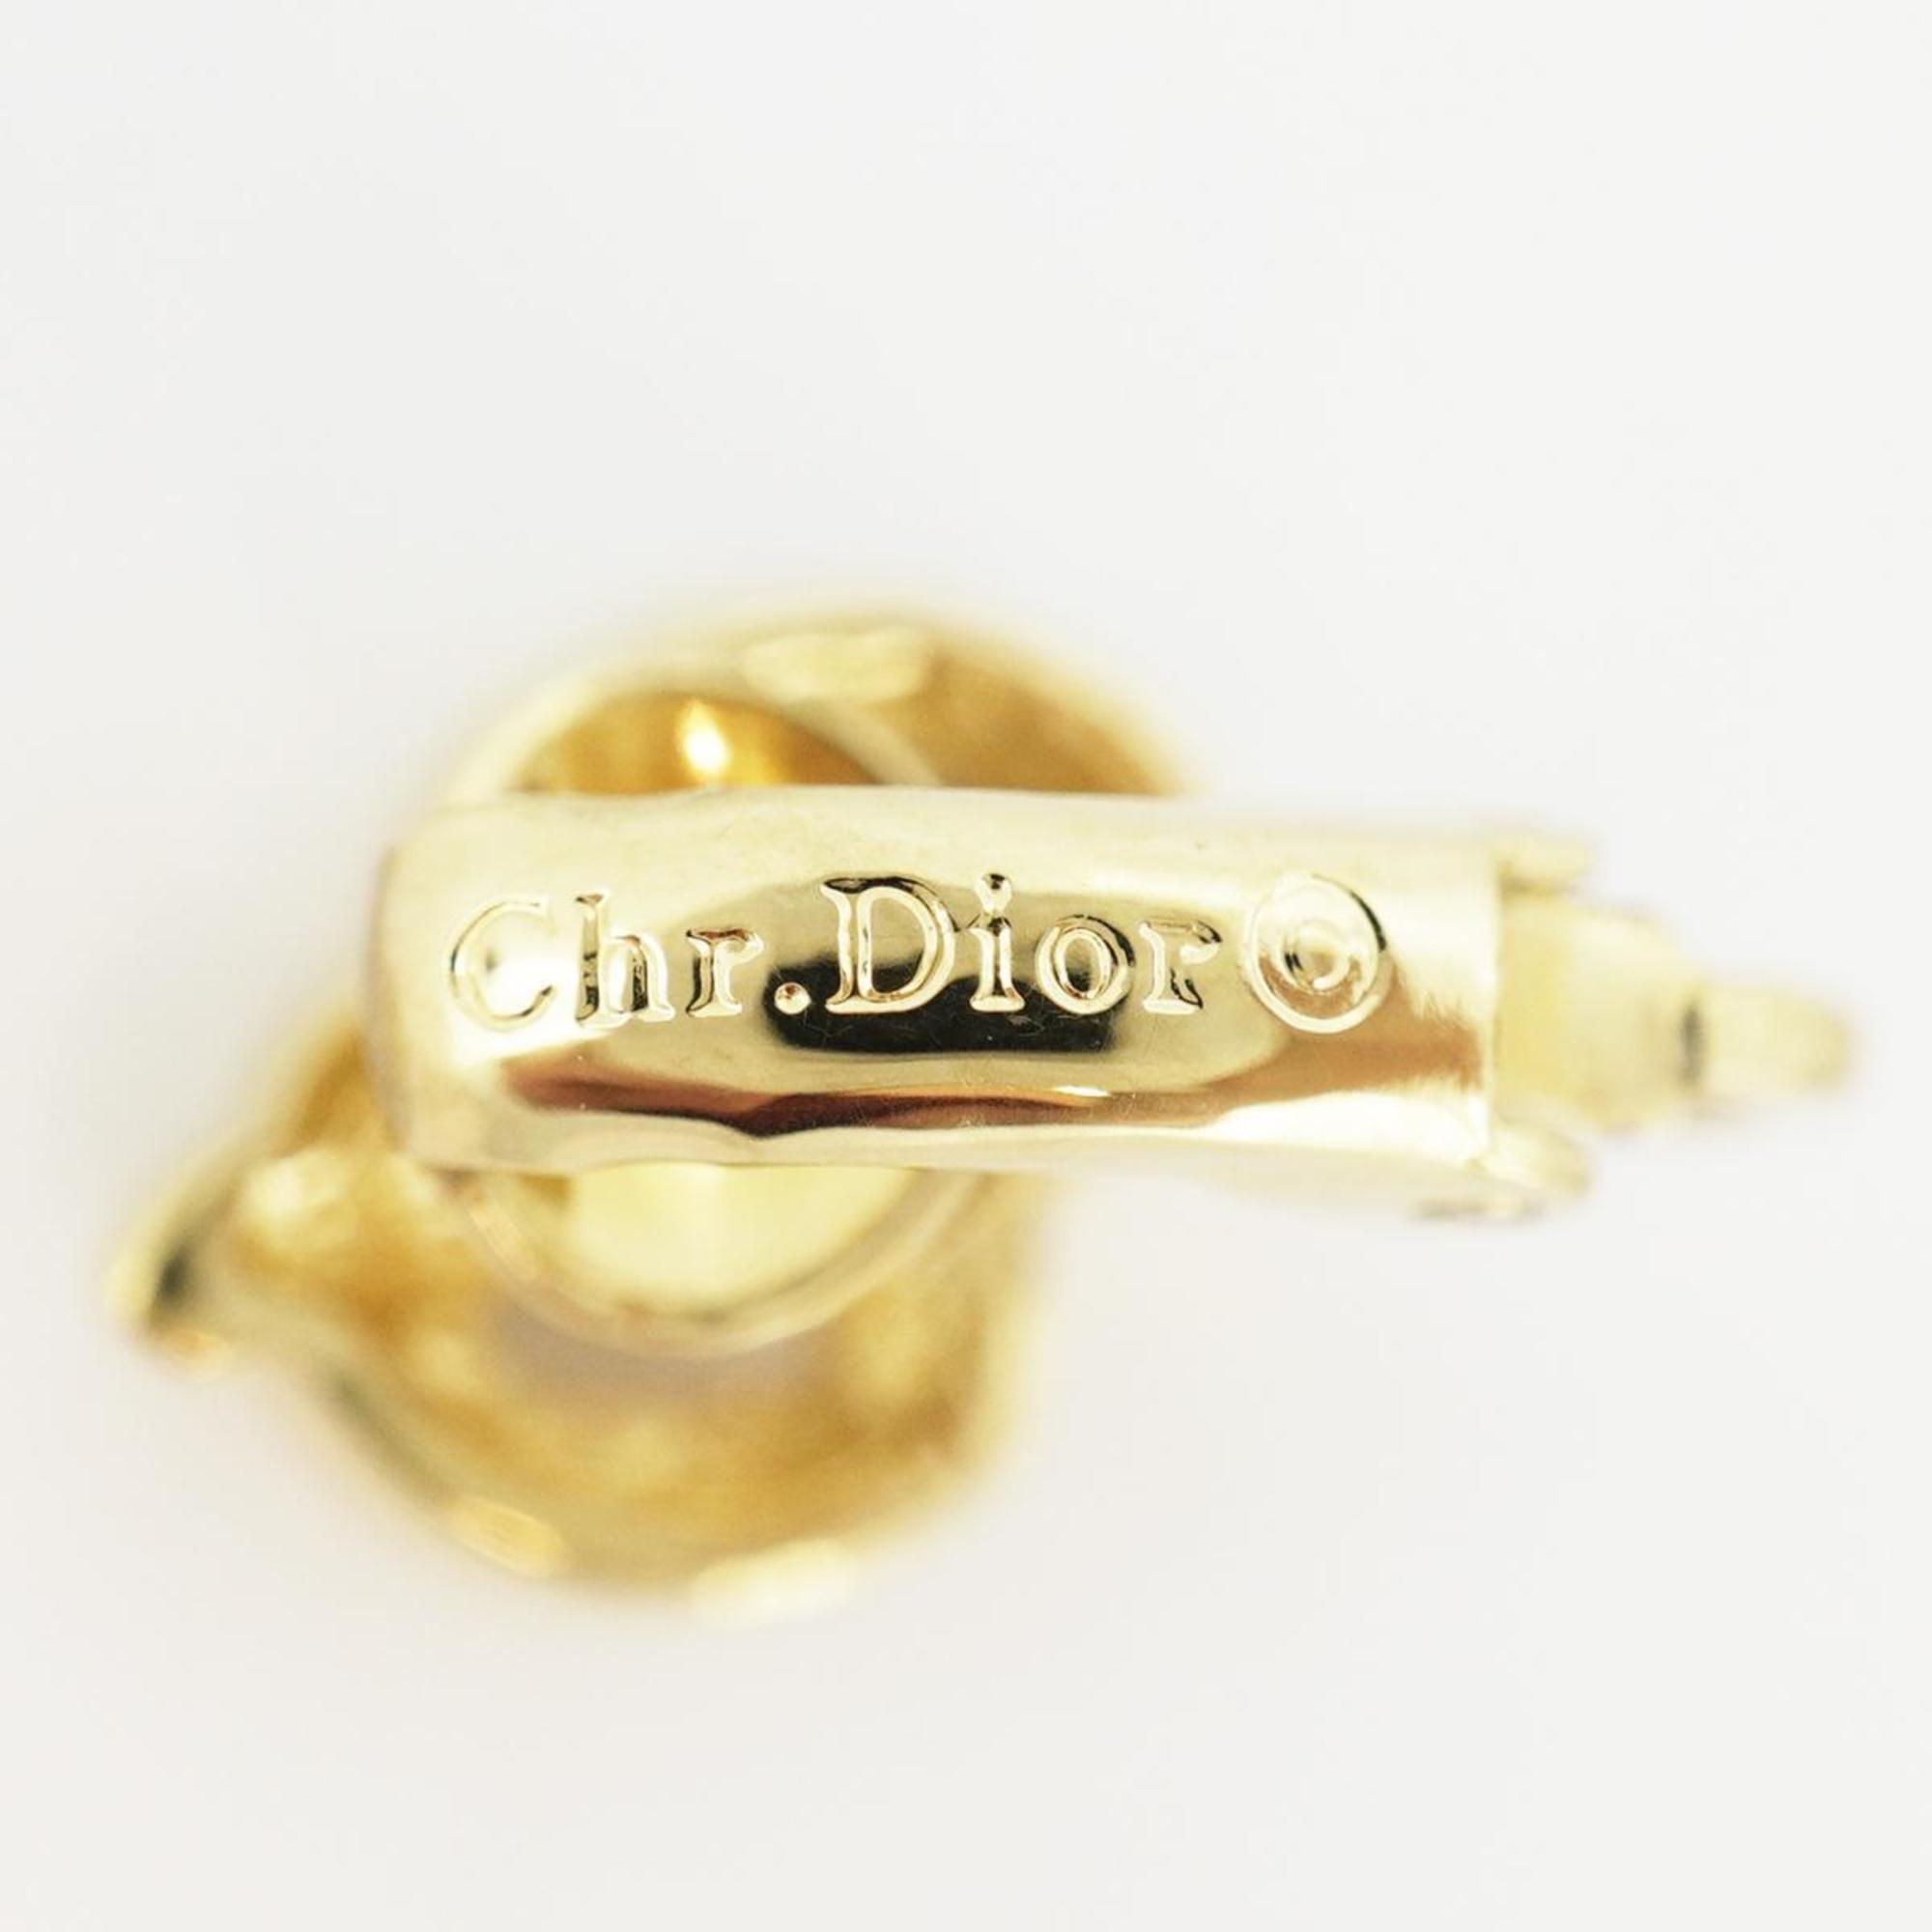 Christian Dior Earrings GP Plated Gold Women's